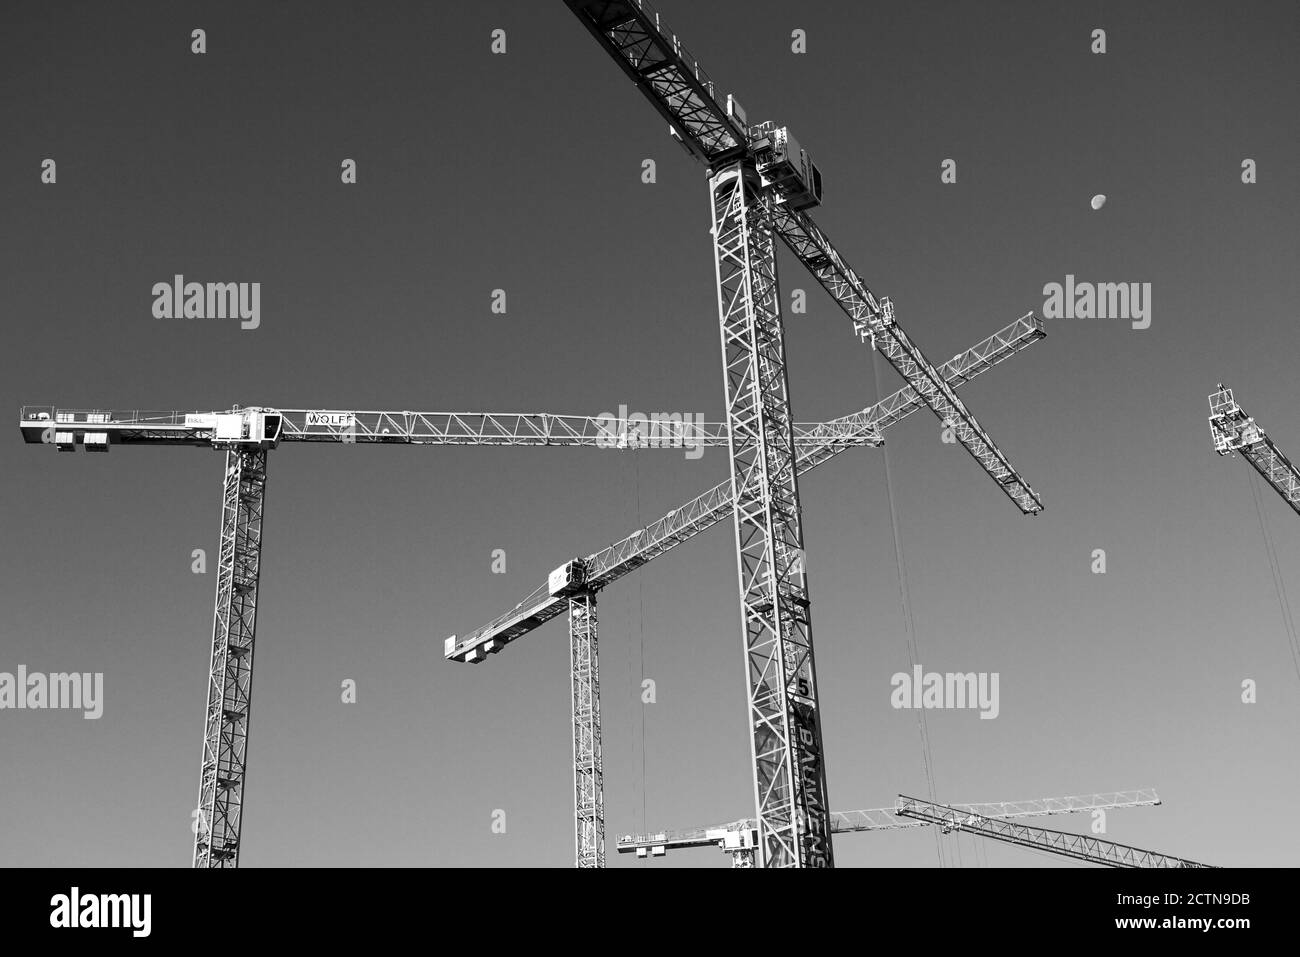 Several construction cranes on a construction site in black and white Stock Photo